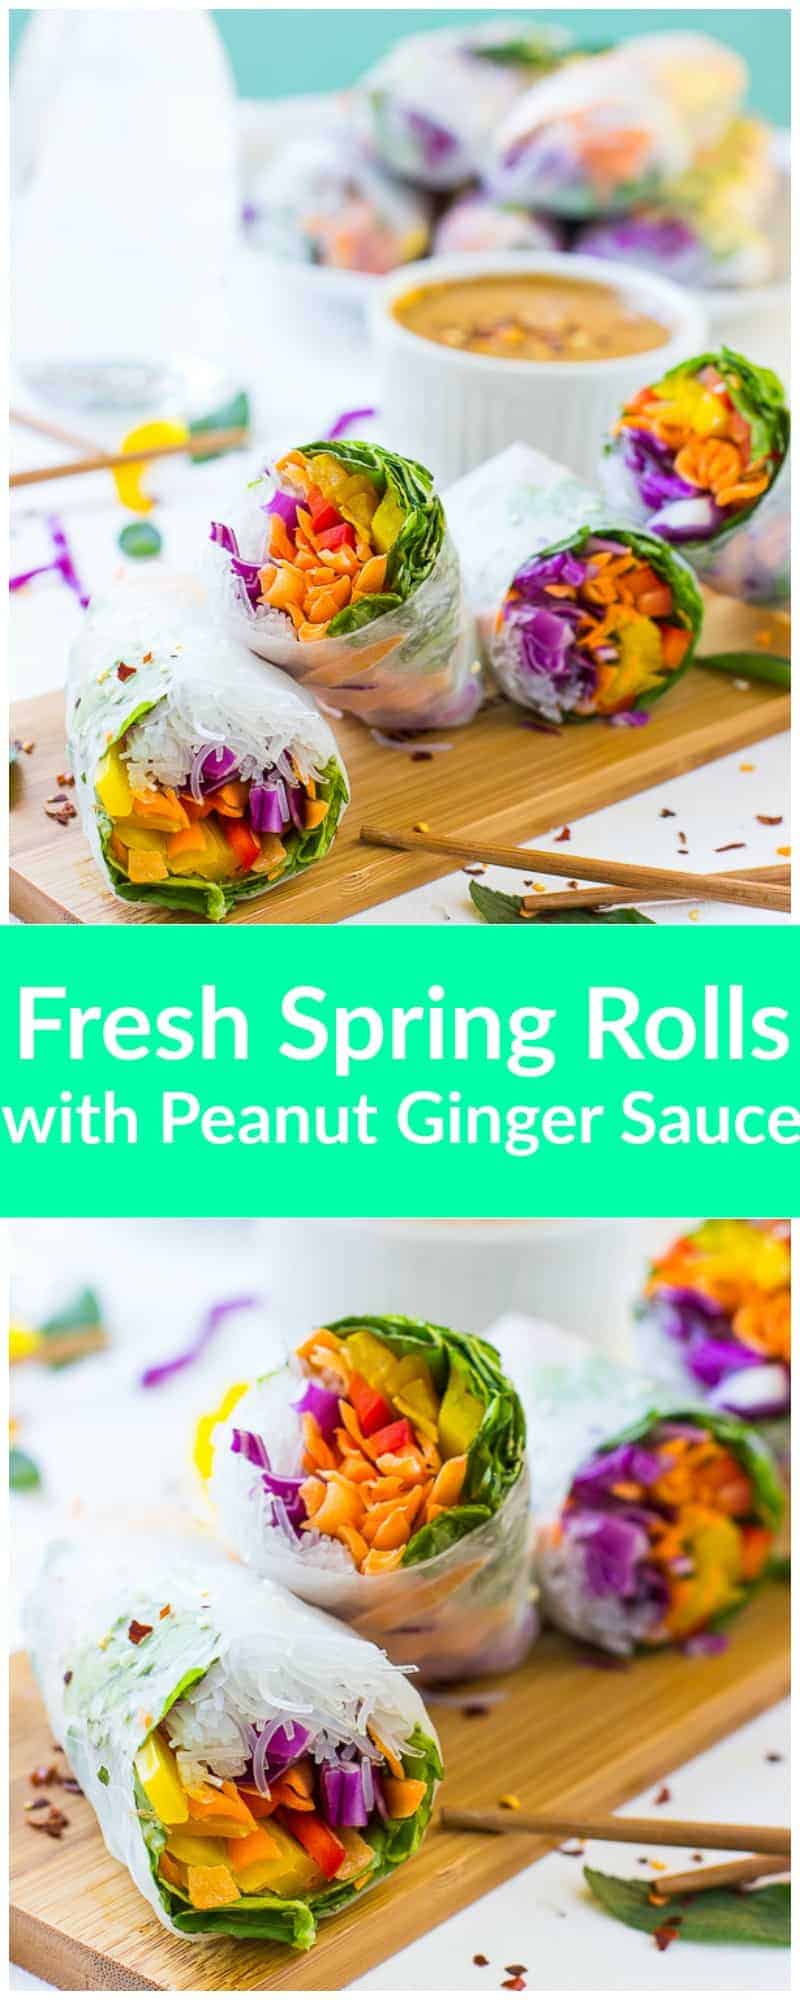 These Fresh Spring Rolls are a colorful, crunchy vegan meal that are perfect for a light lunch, dinner or appetizer! They are served with an amazing Peanut Ginger Sauce and are gluten free!